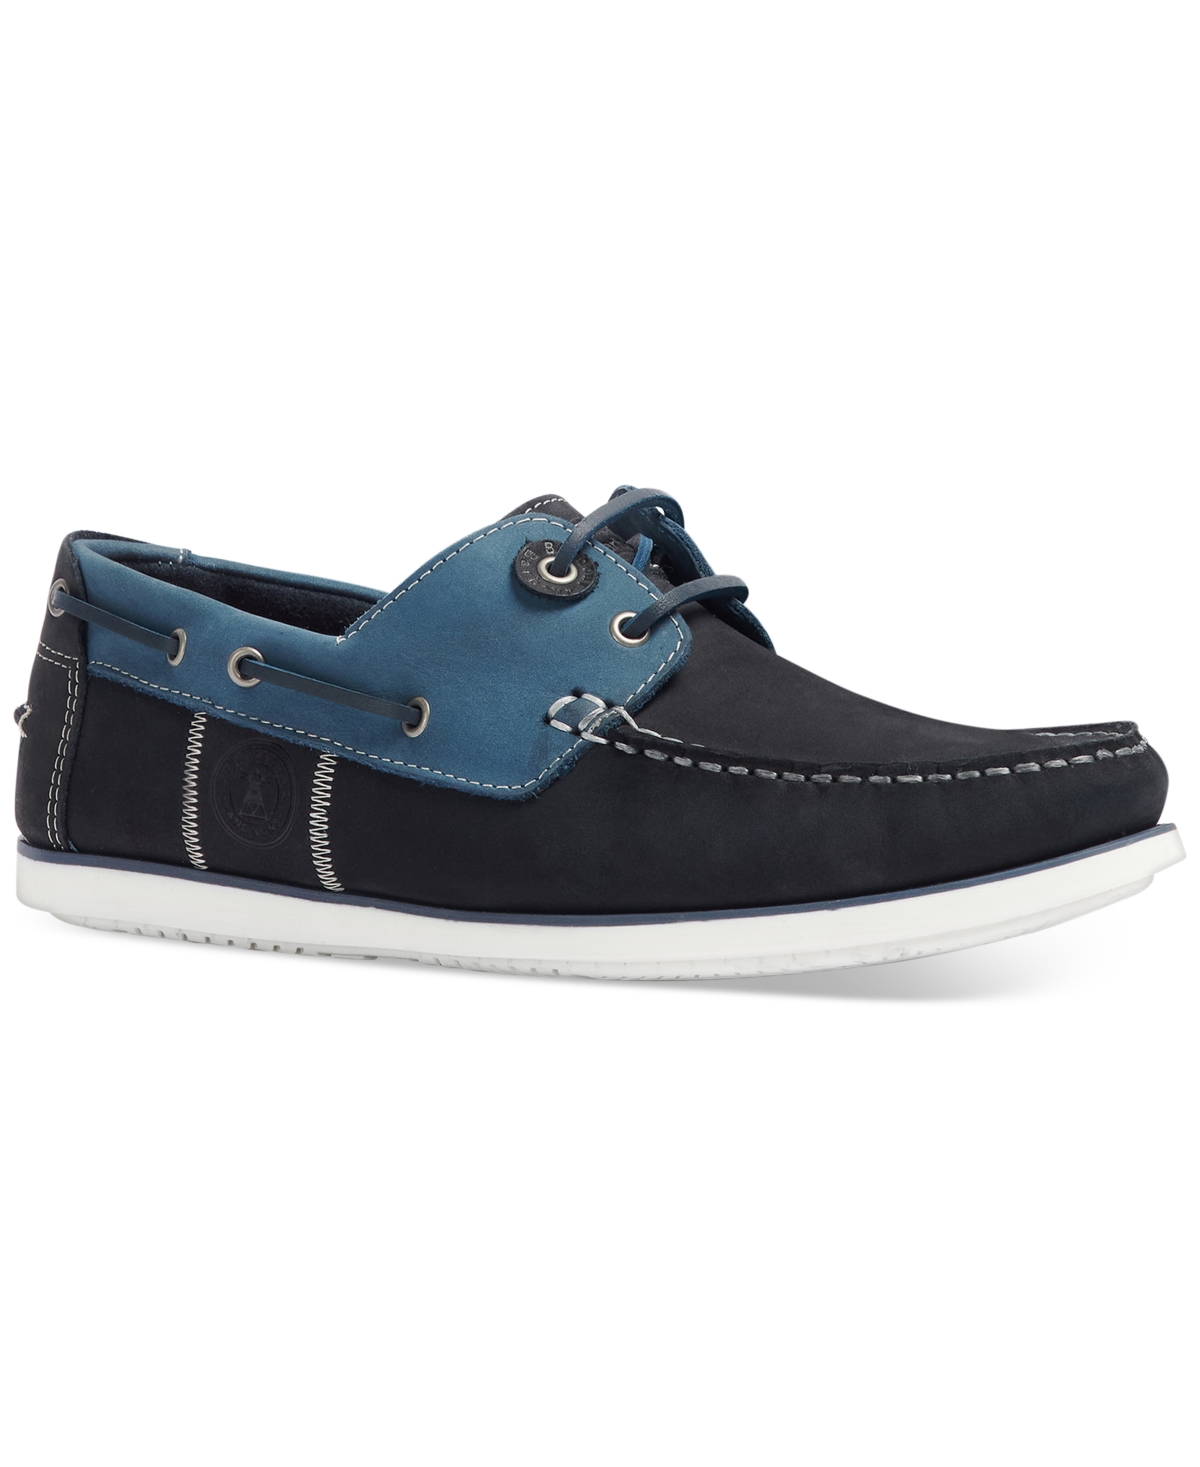 Men's Leather & Suede Wake 2-Eye Boat Shoes - Washed Blue